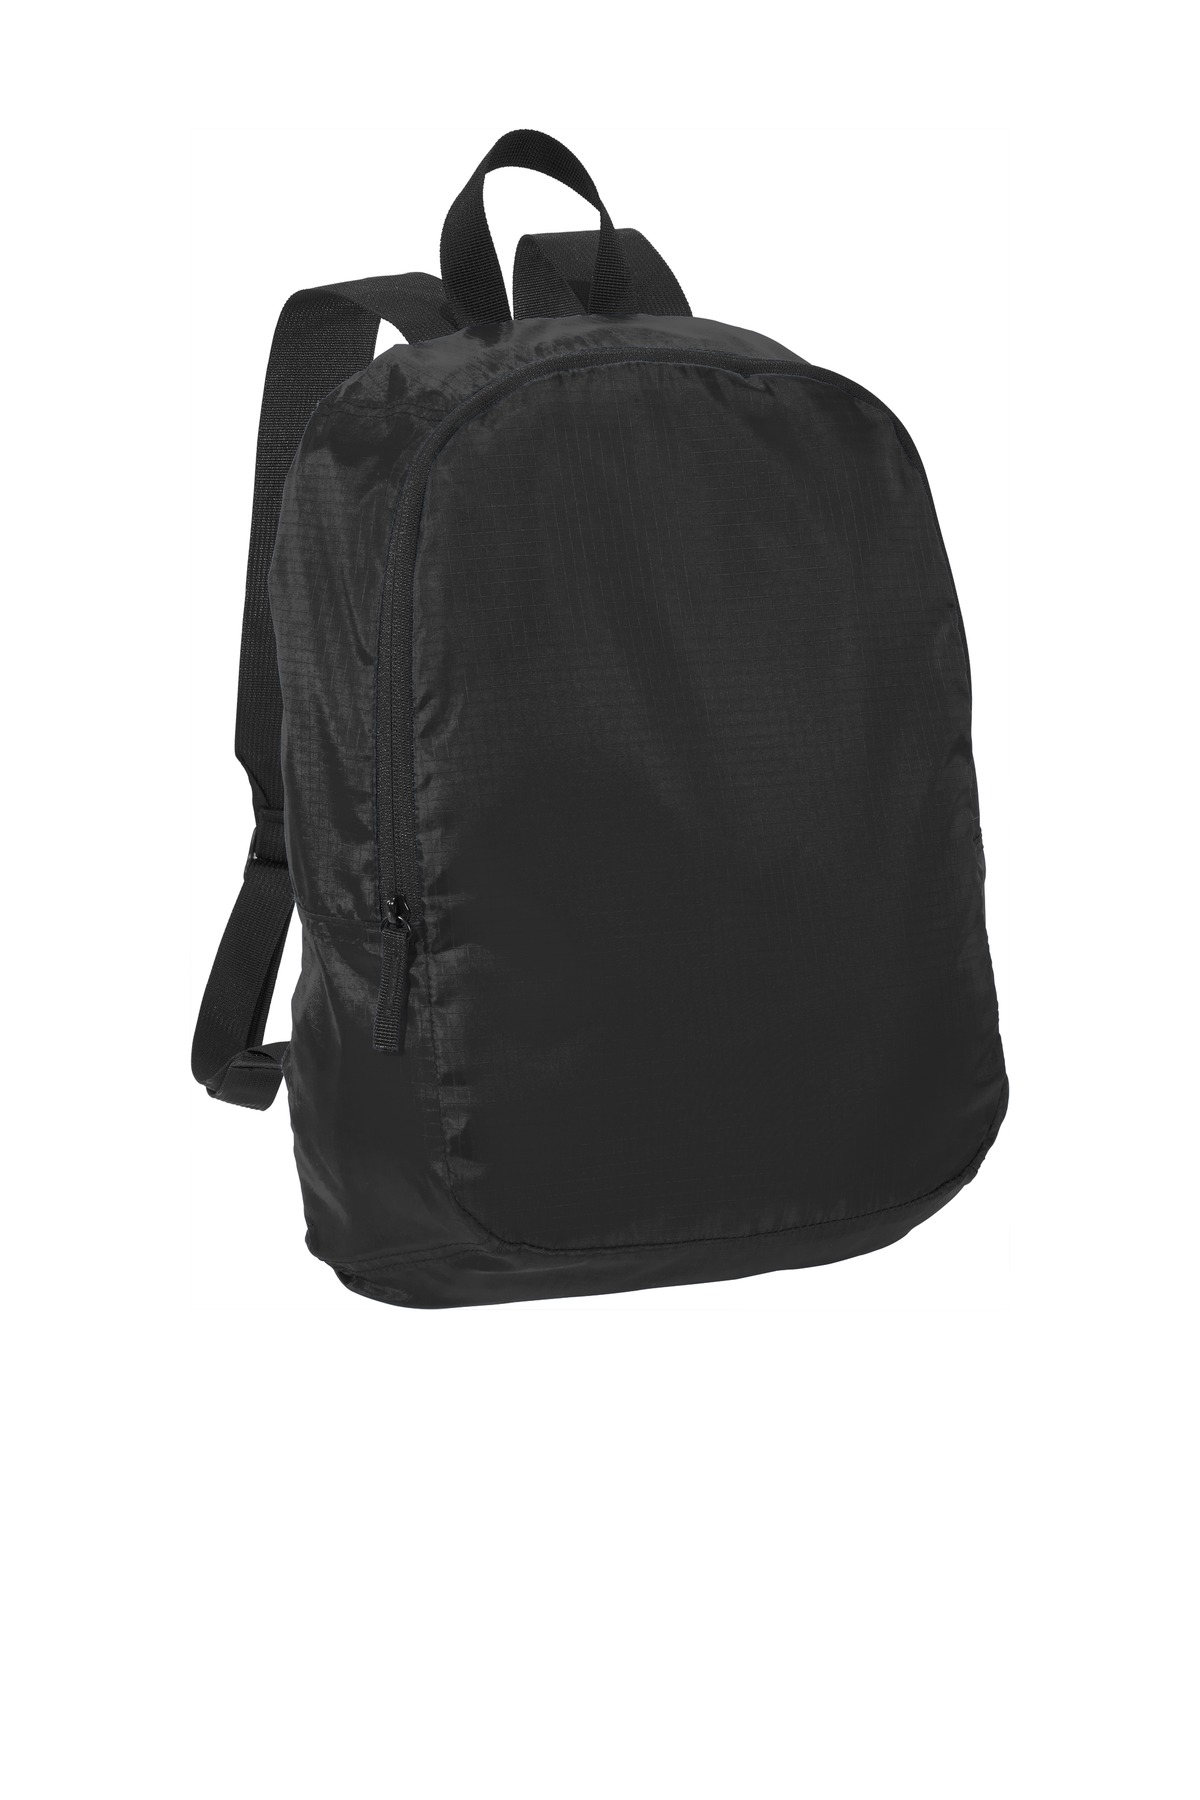 Port Authority Crush Ripstop Backpack-Port Authority